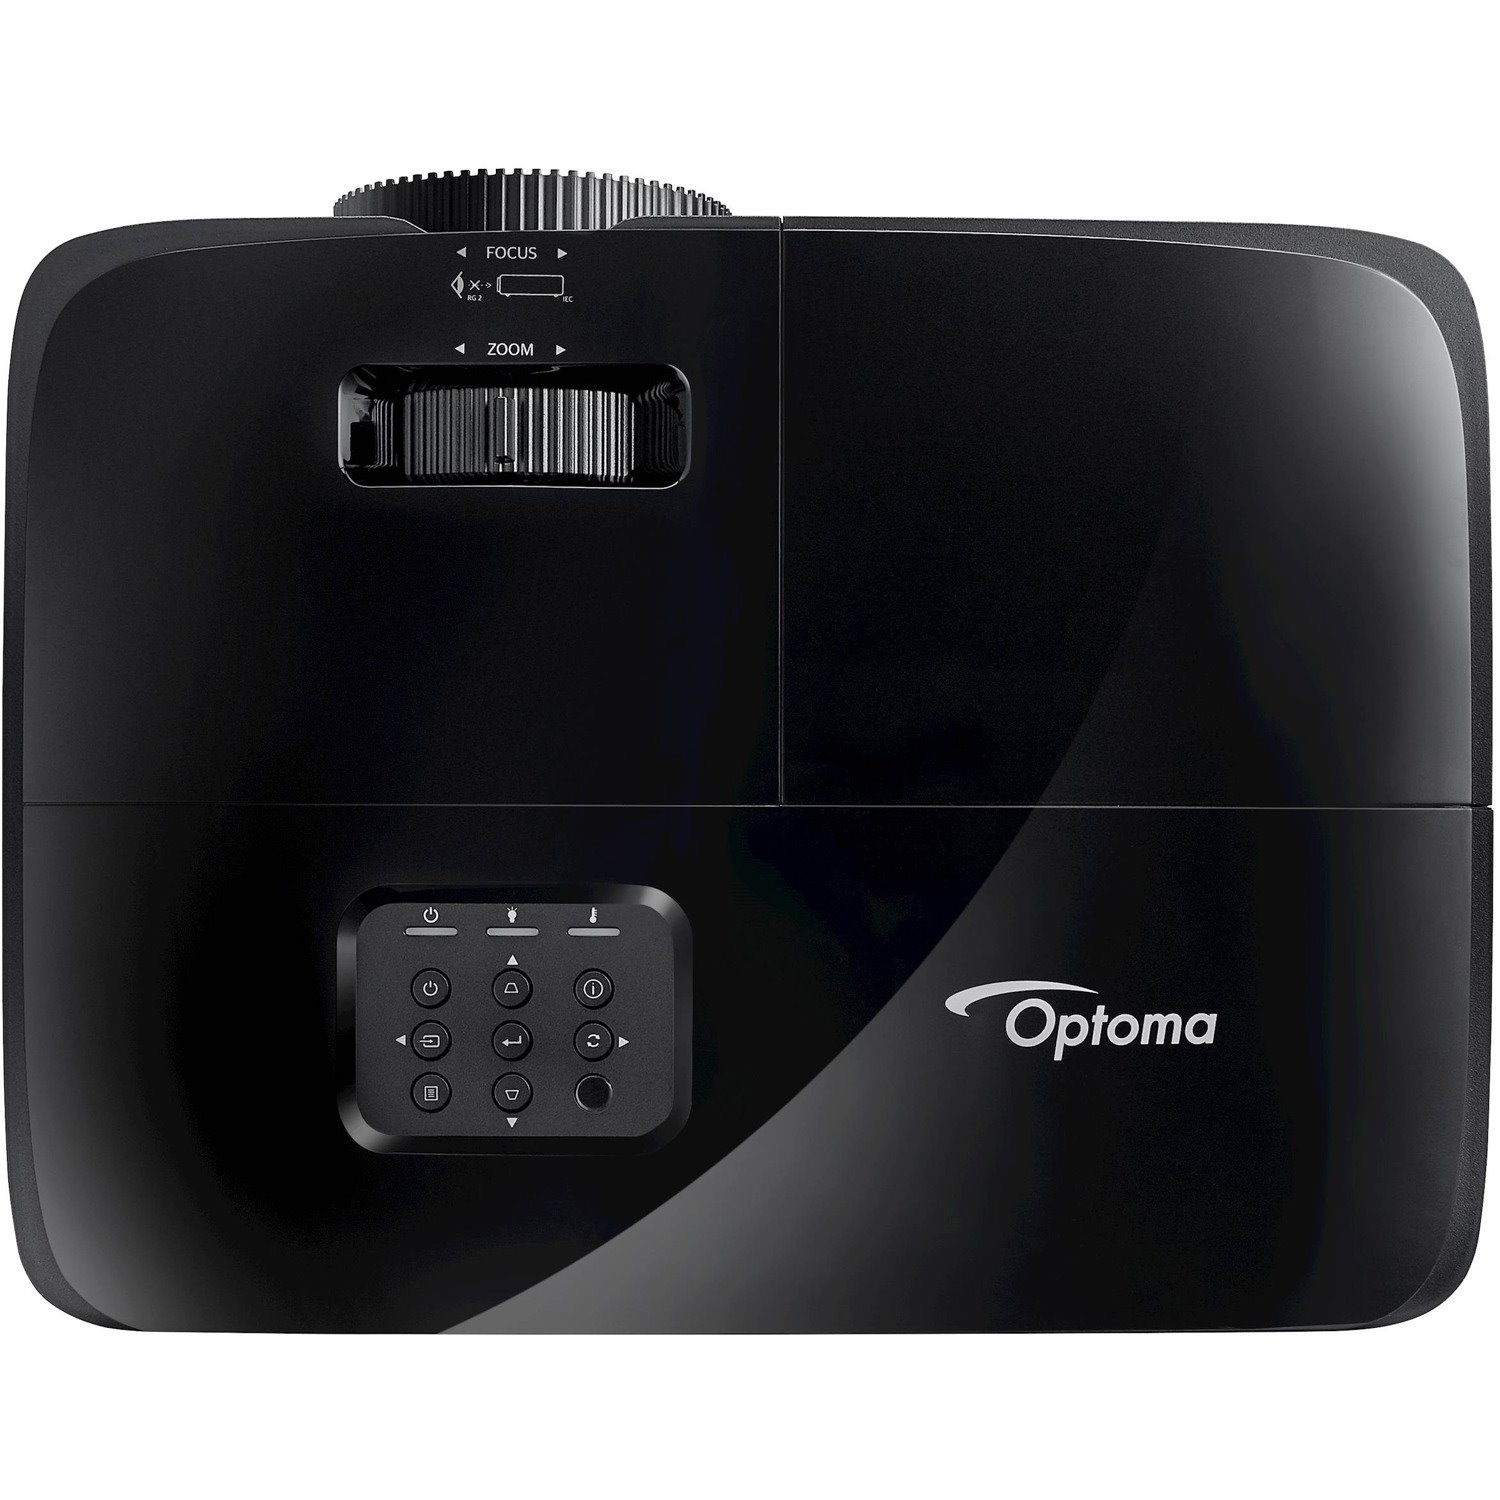 Optoma DH351 3D DLP Projector - 16:9